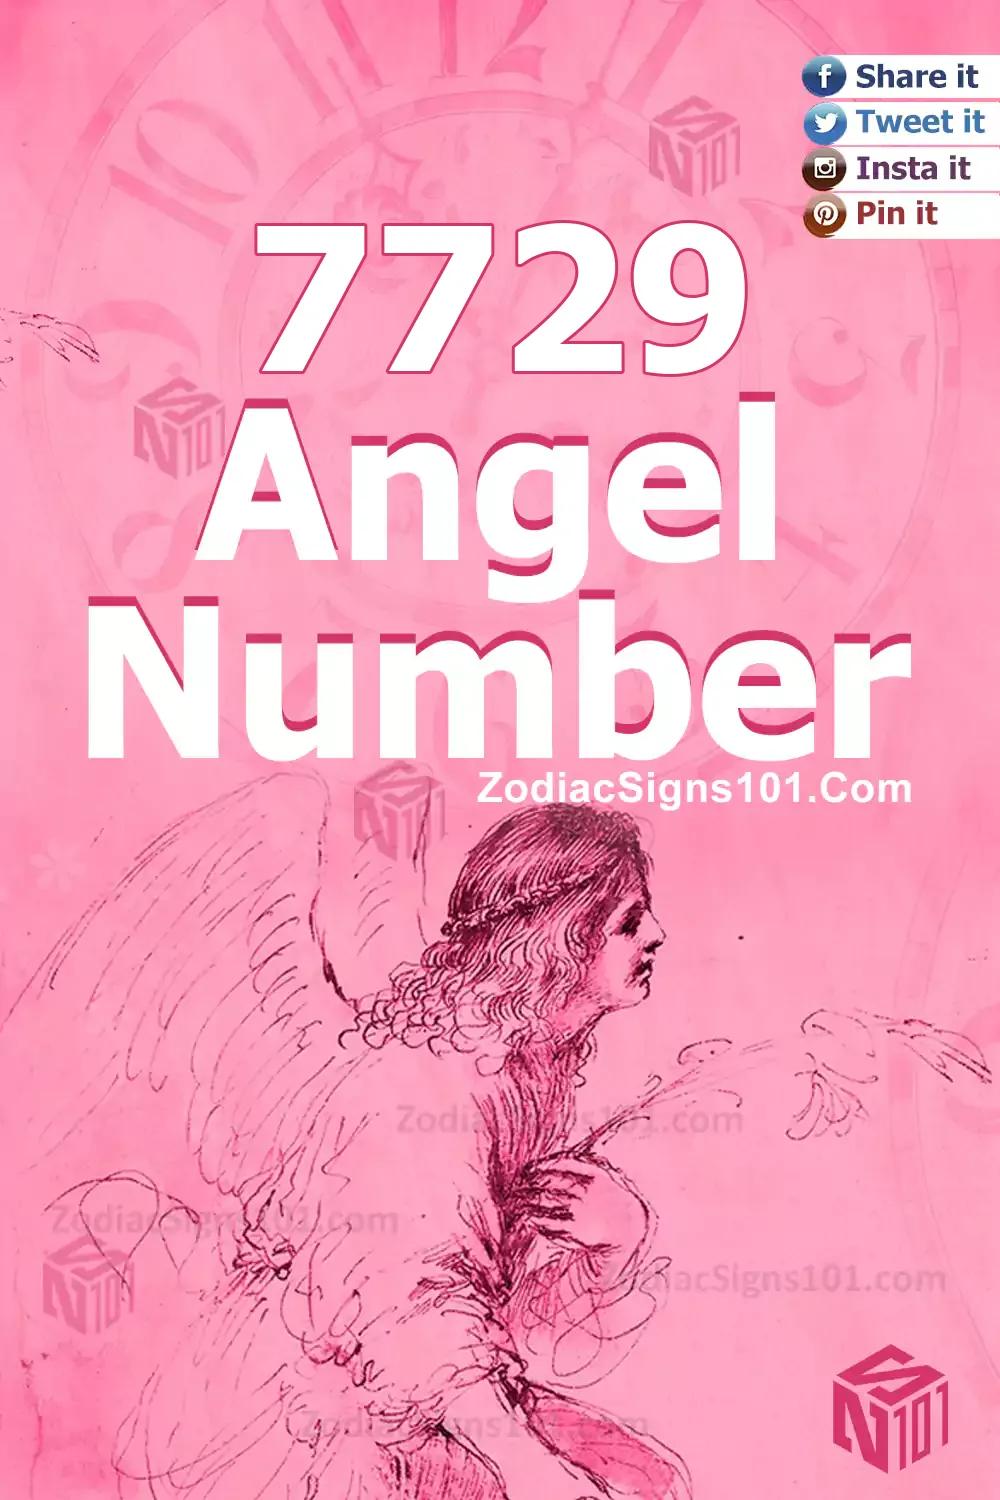 7729 Angel Number Meaning